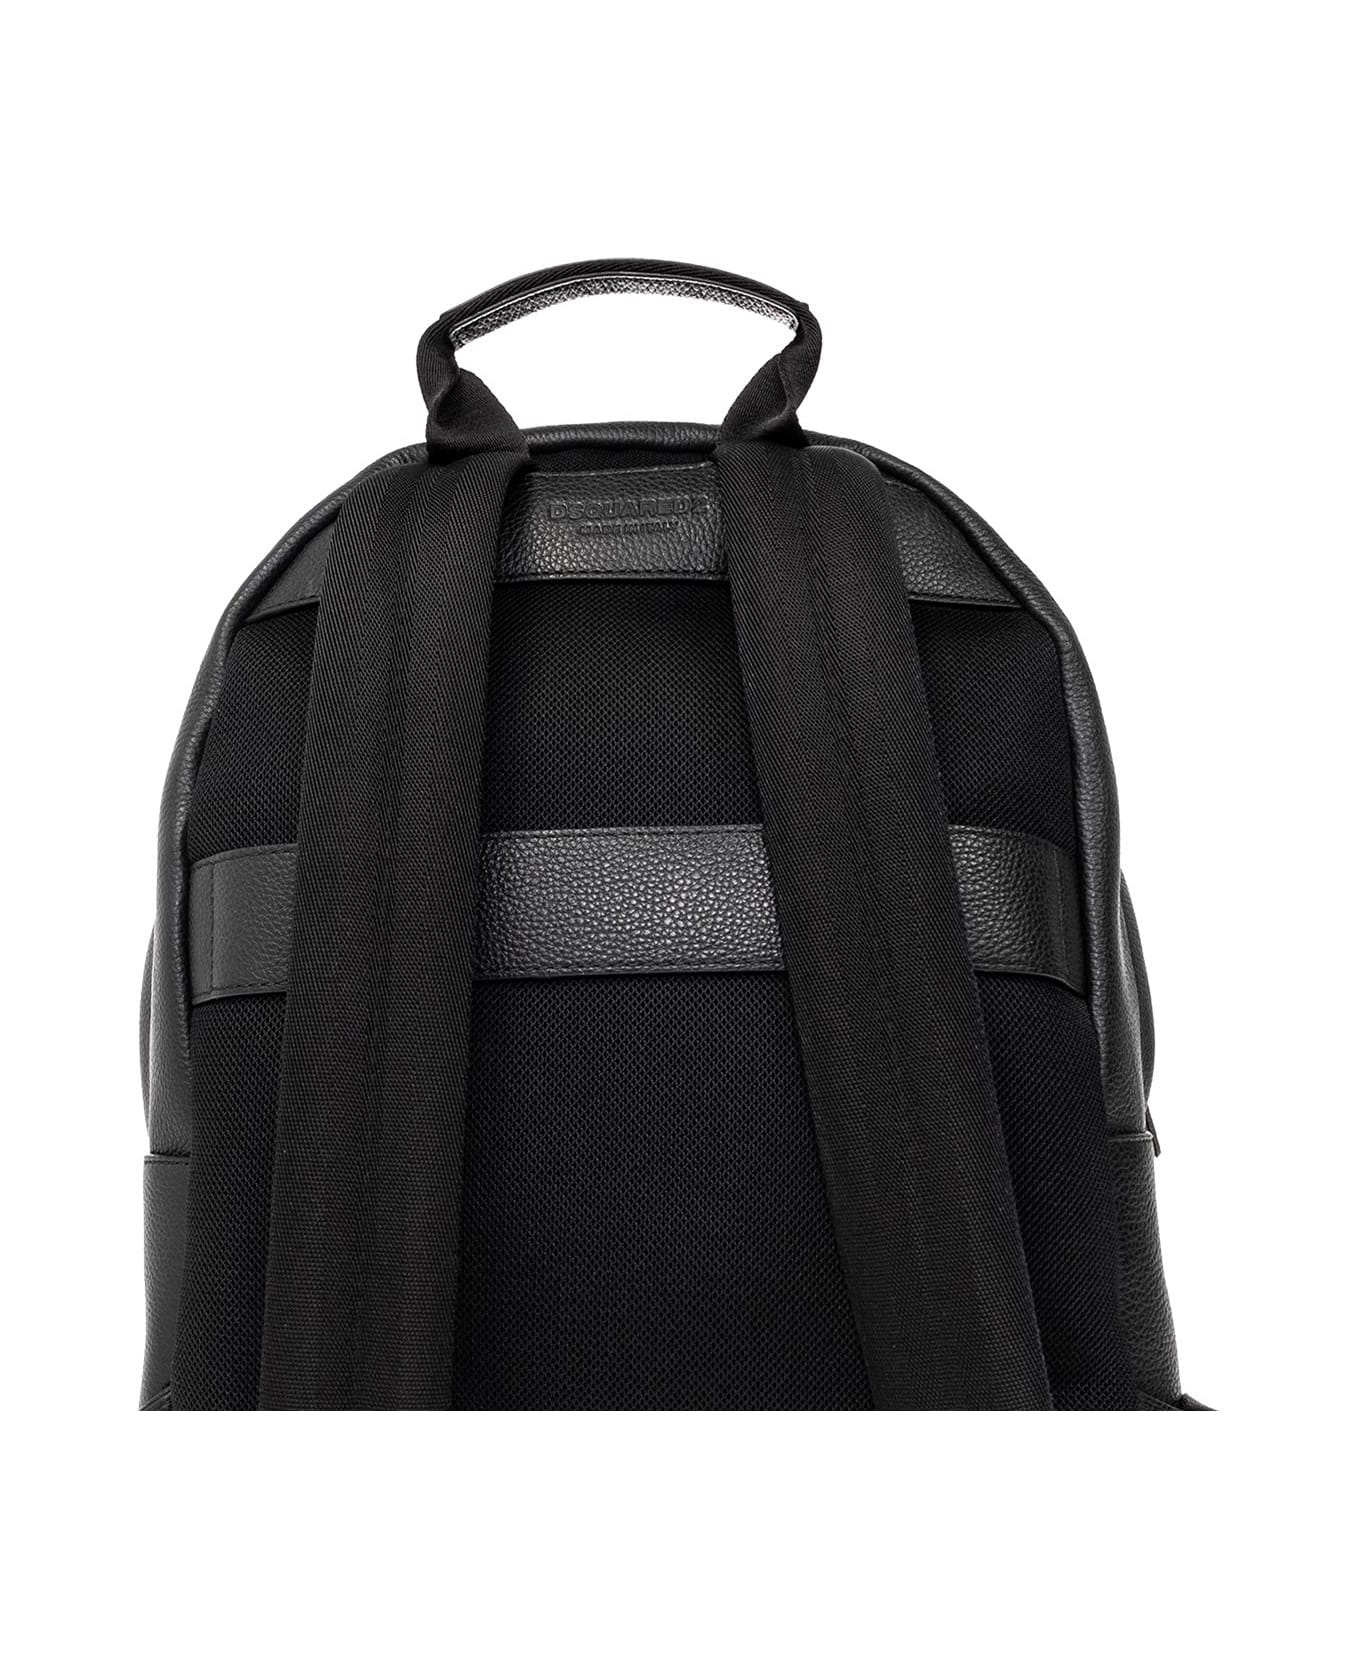 Dsquared2 Backpack With Logo - Black